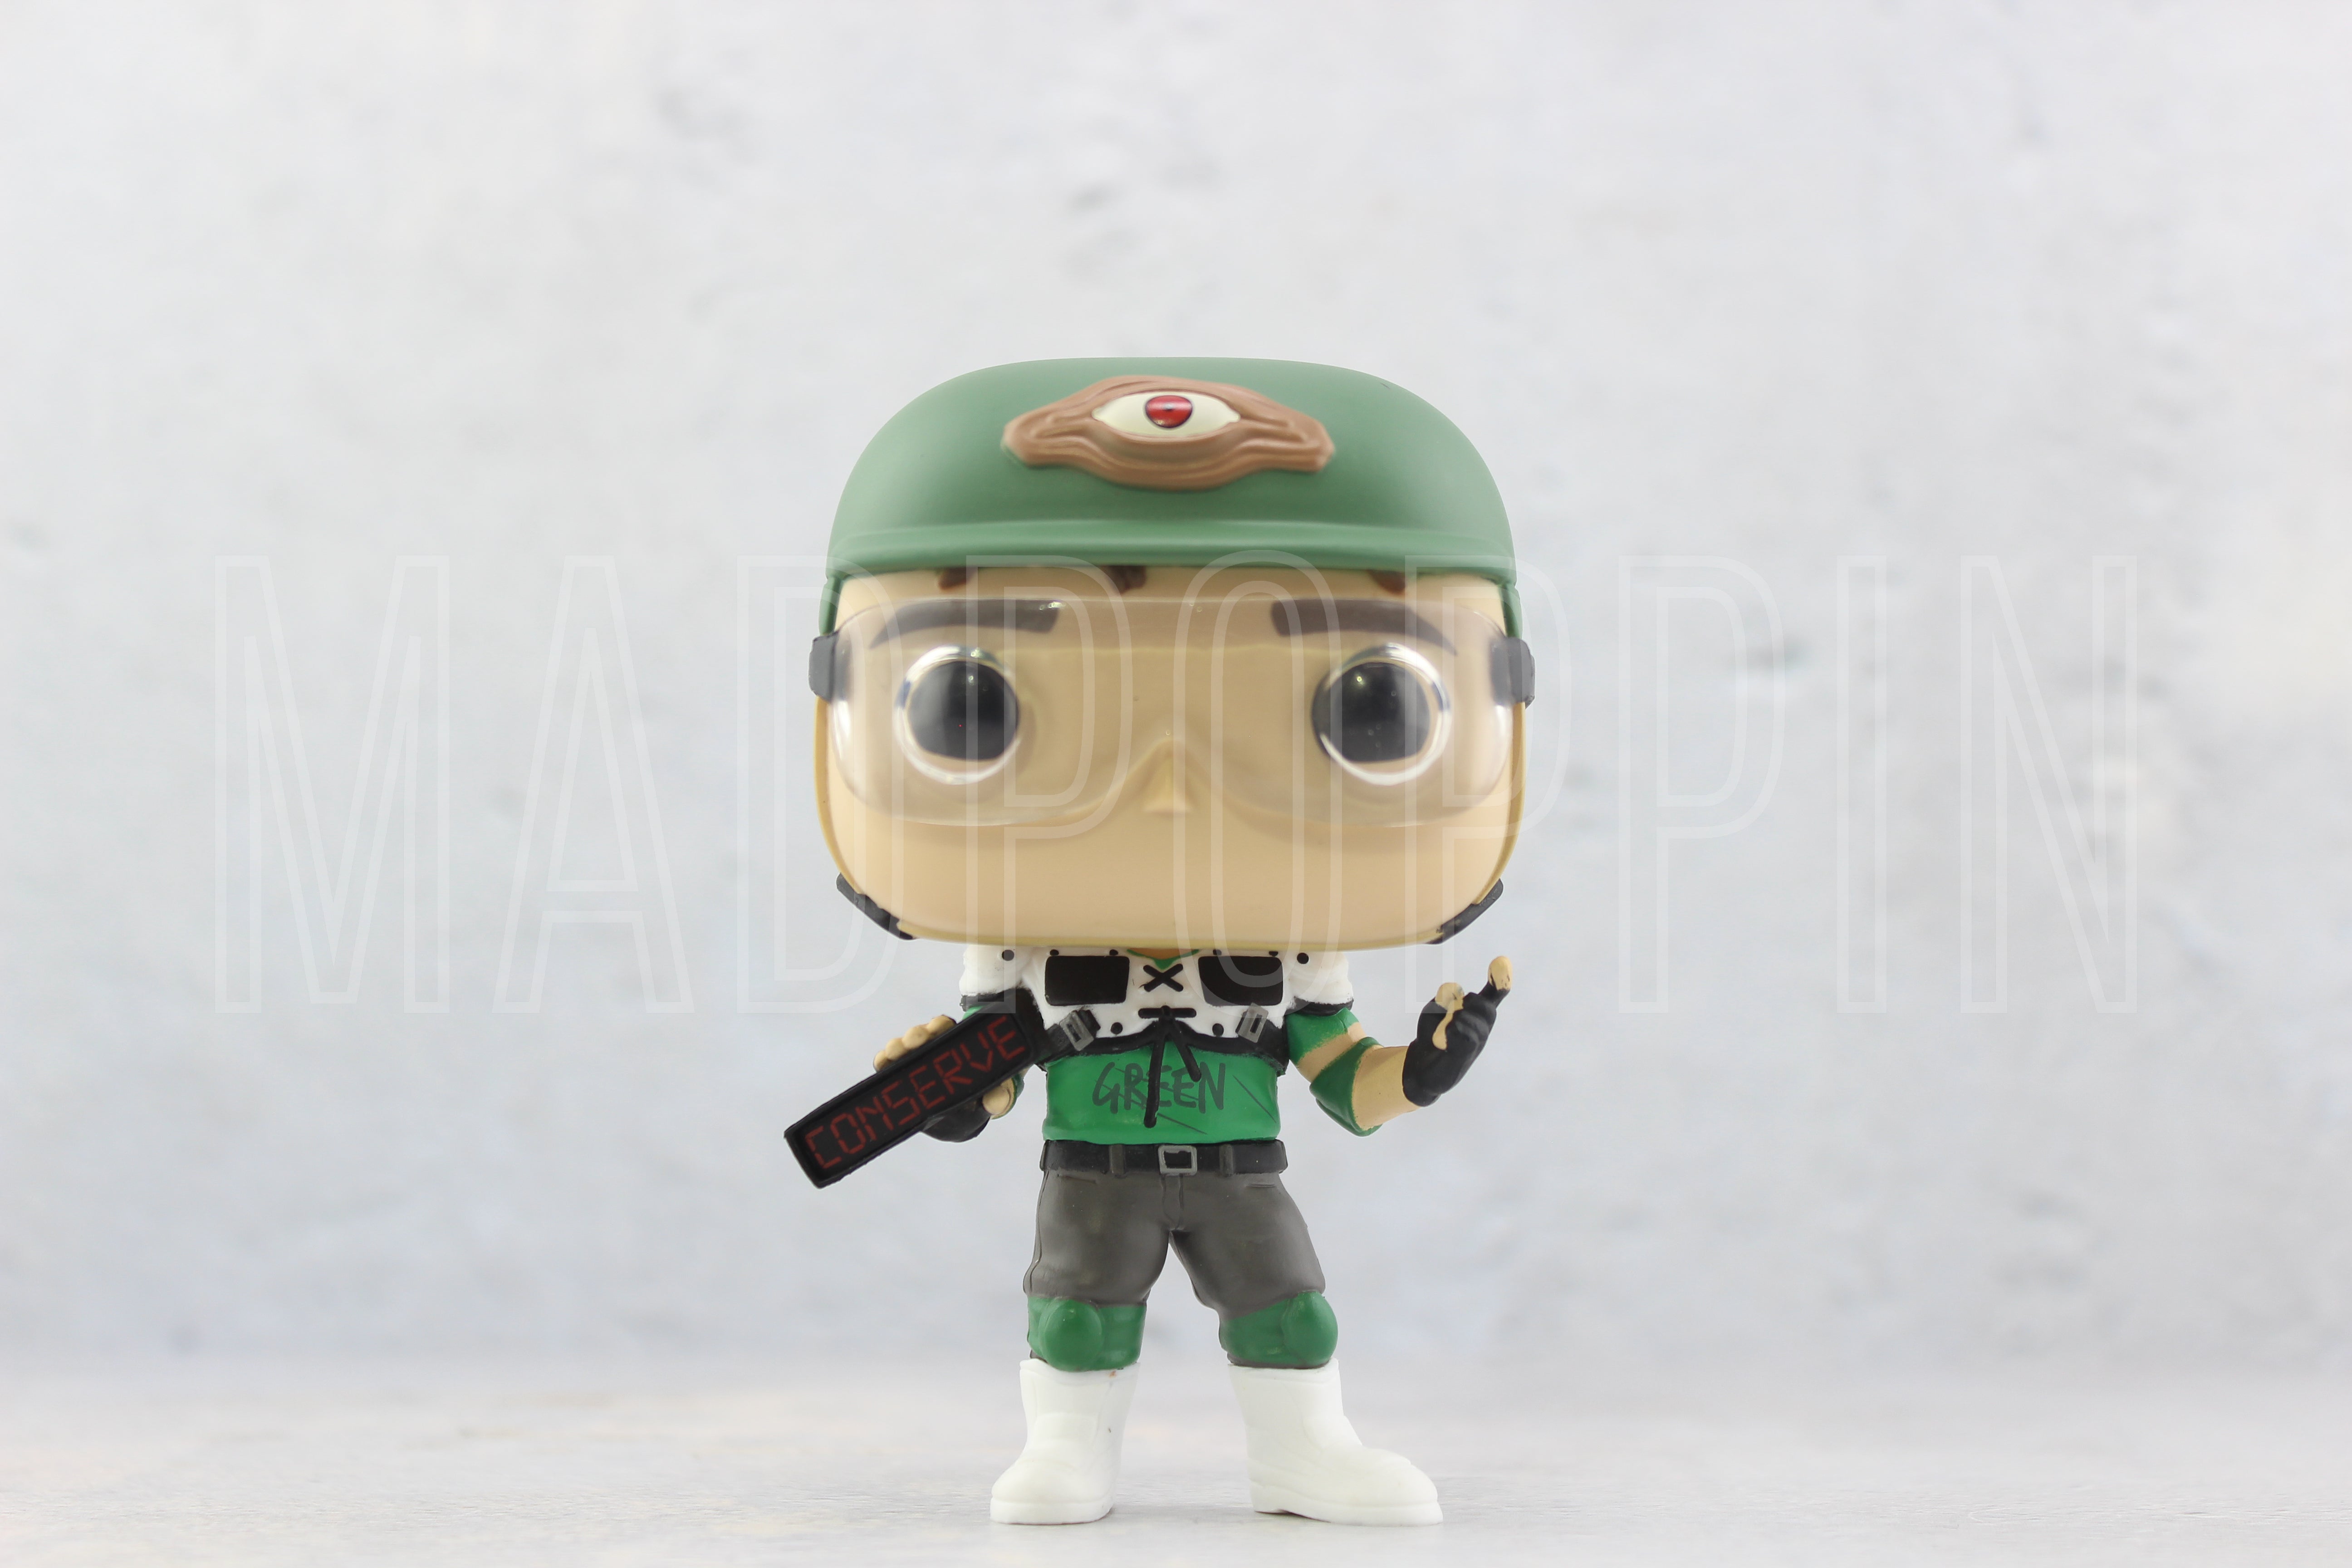 POP! Television: The Office - Dwight Schrute as Recyclops (Out of Box/Loose)